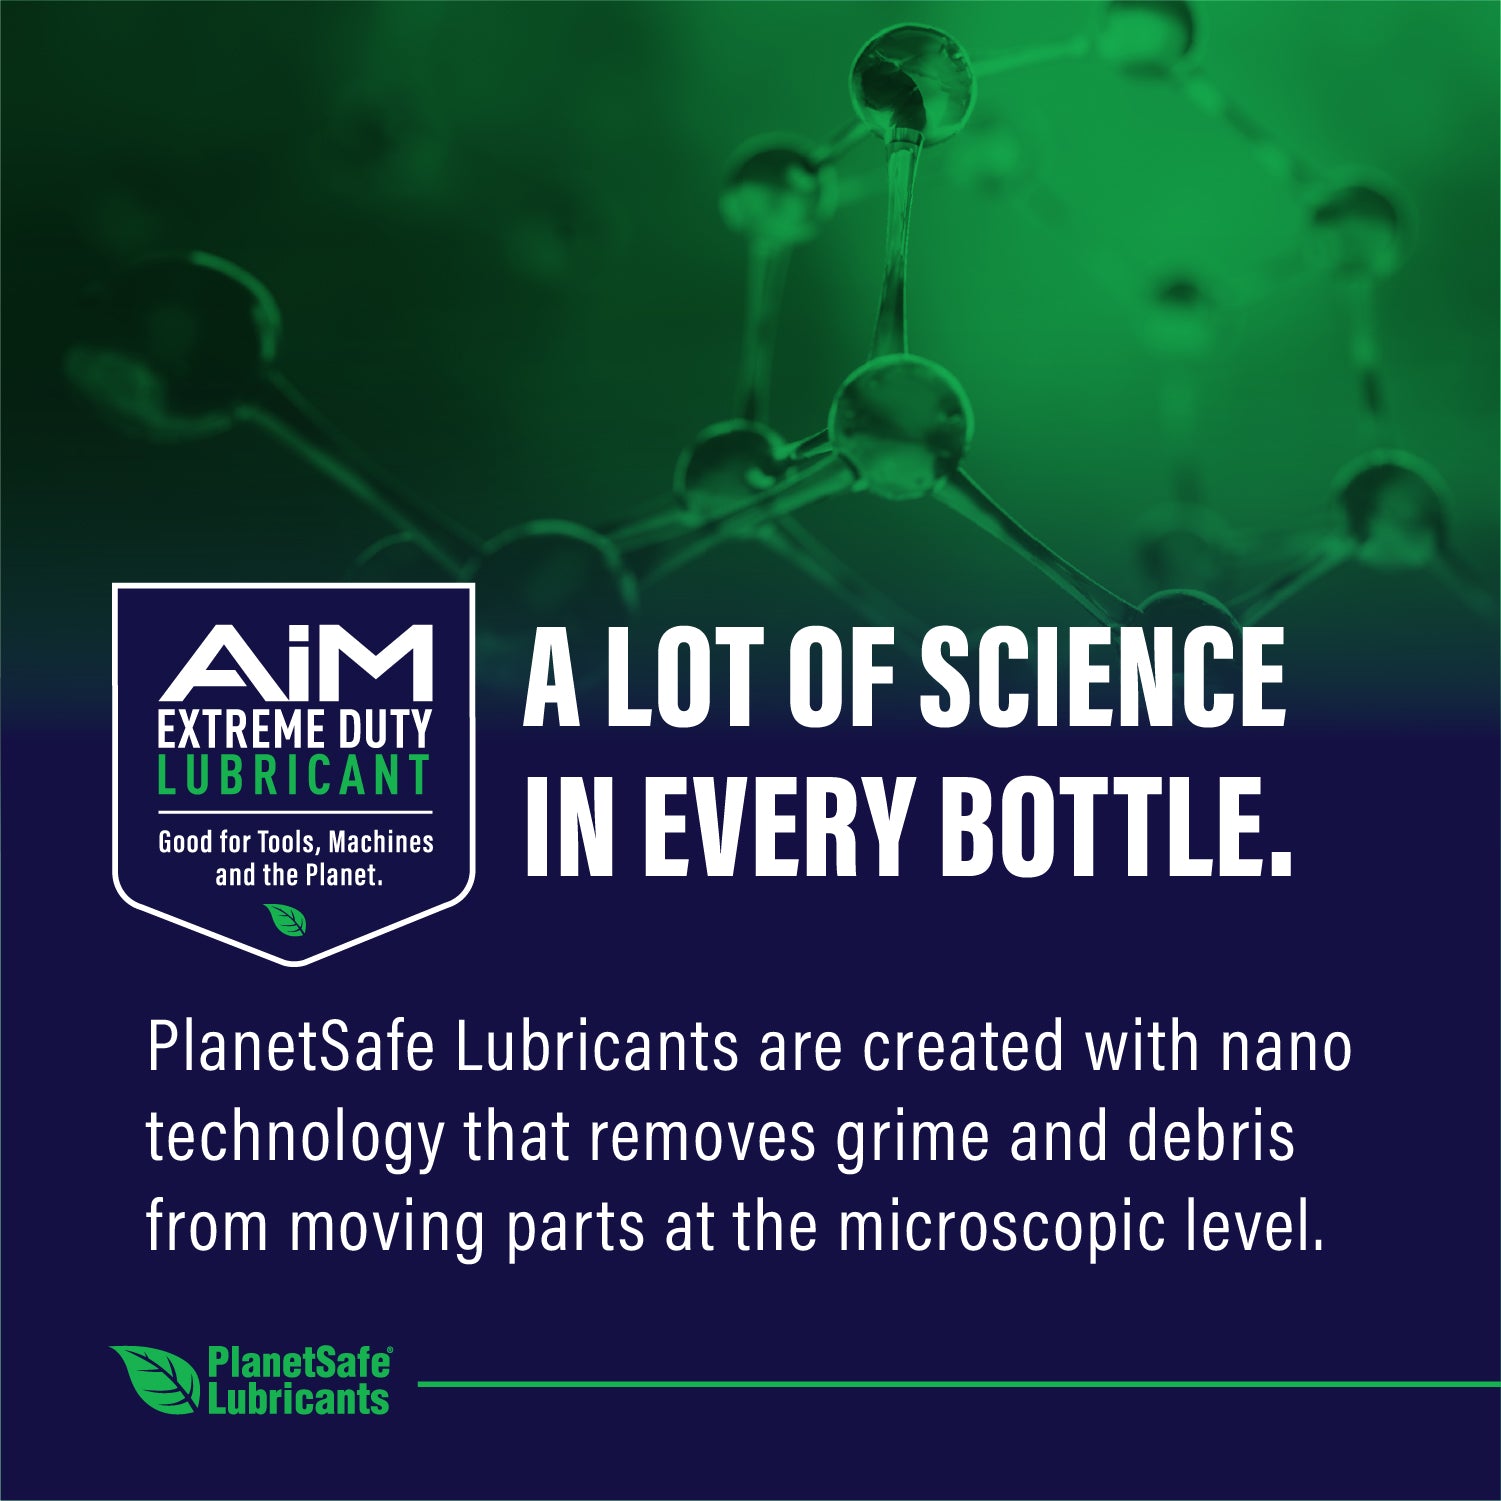 Pneumatic Tool and Air Tools Lubricant - PlanetSafe AIM Lubricating oil - what is the best lube for air tools - compressor nozzle safe odorless top